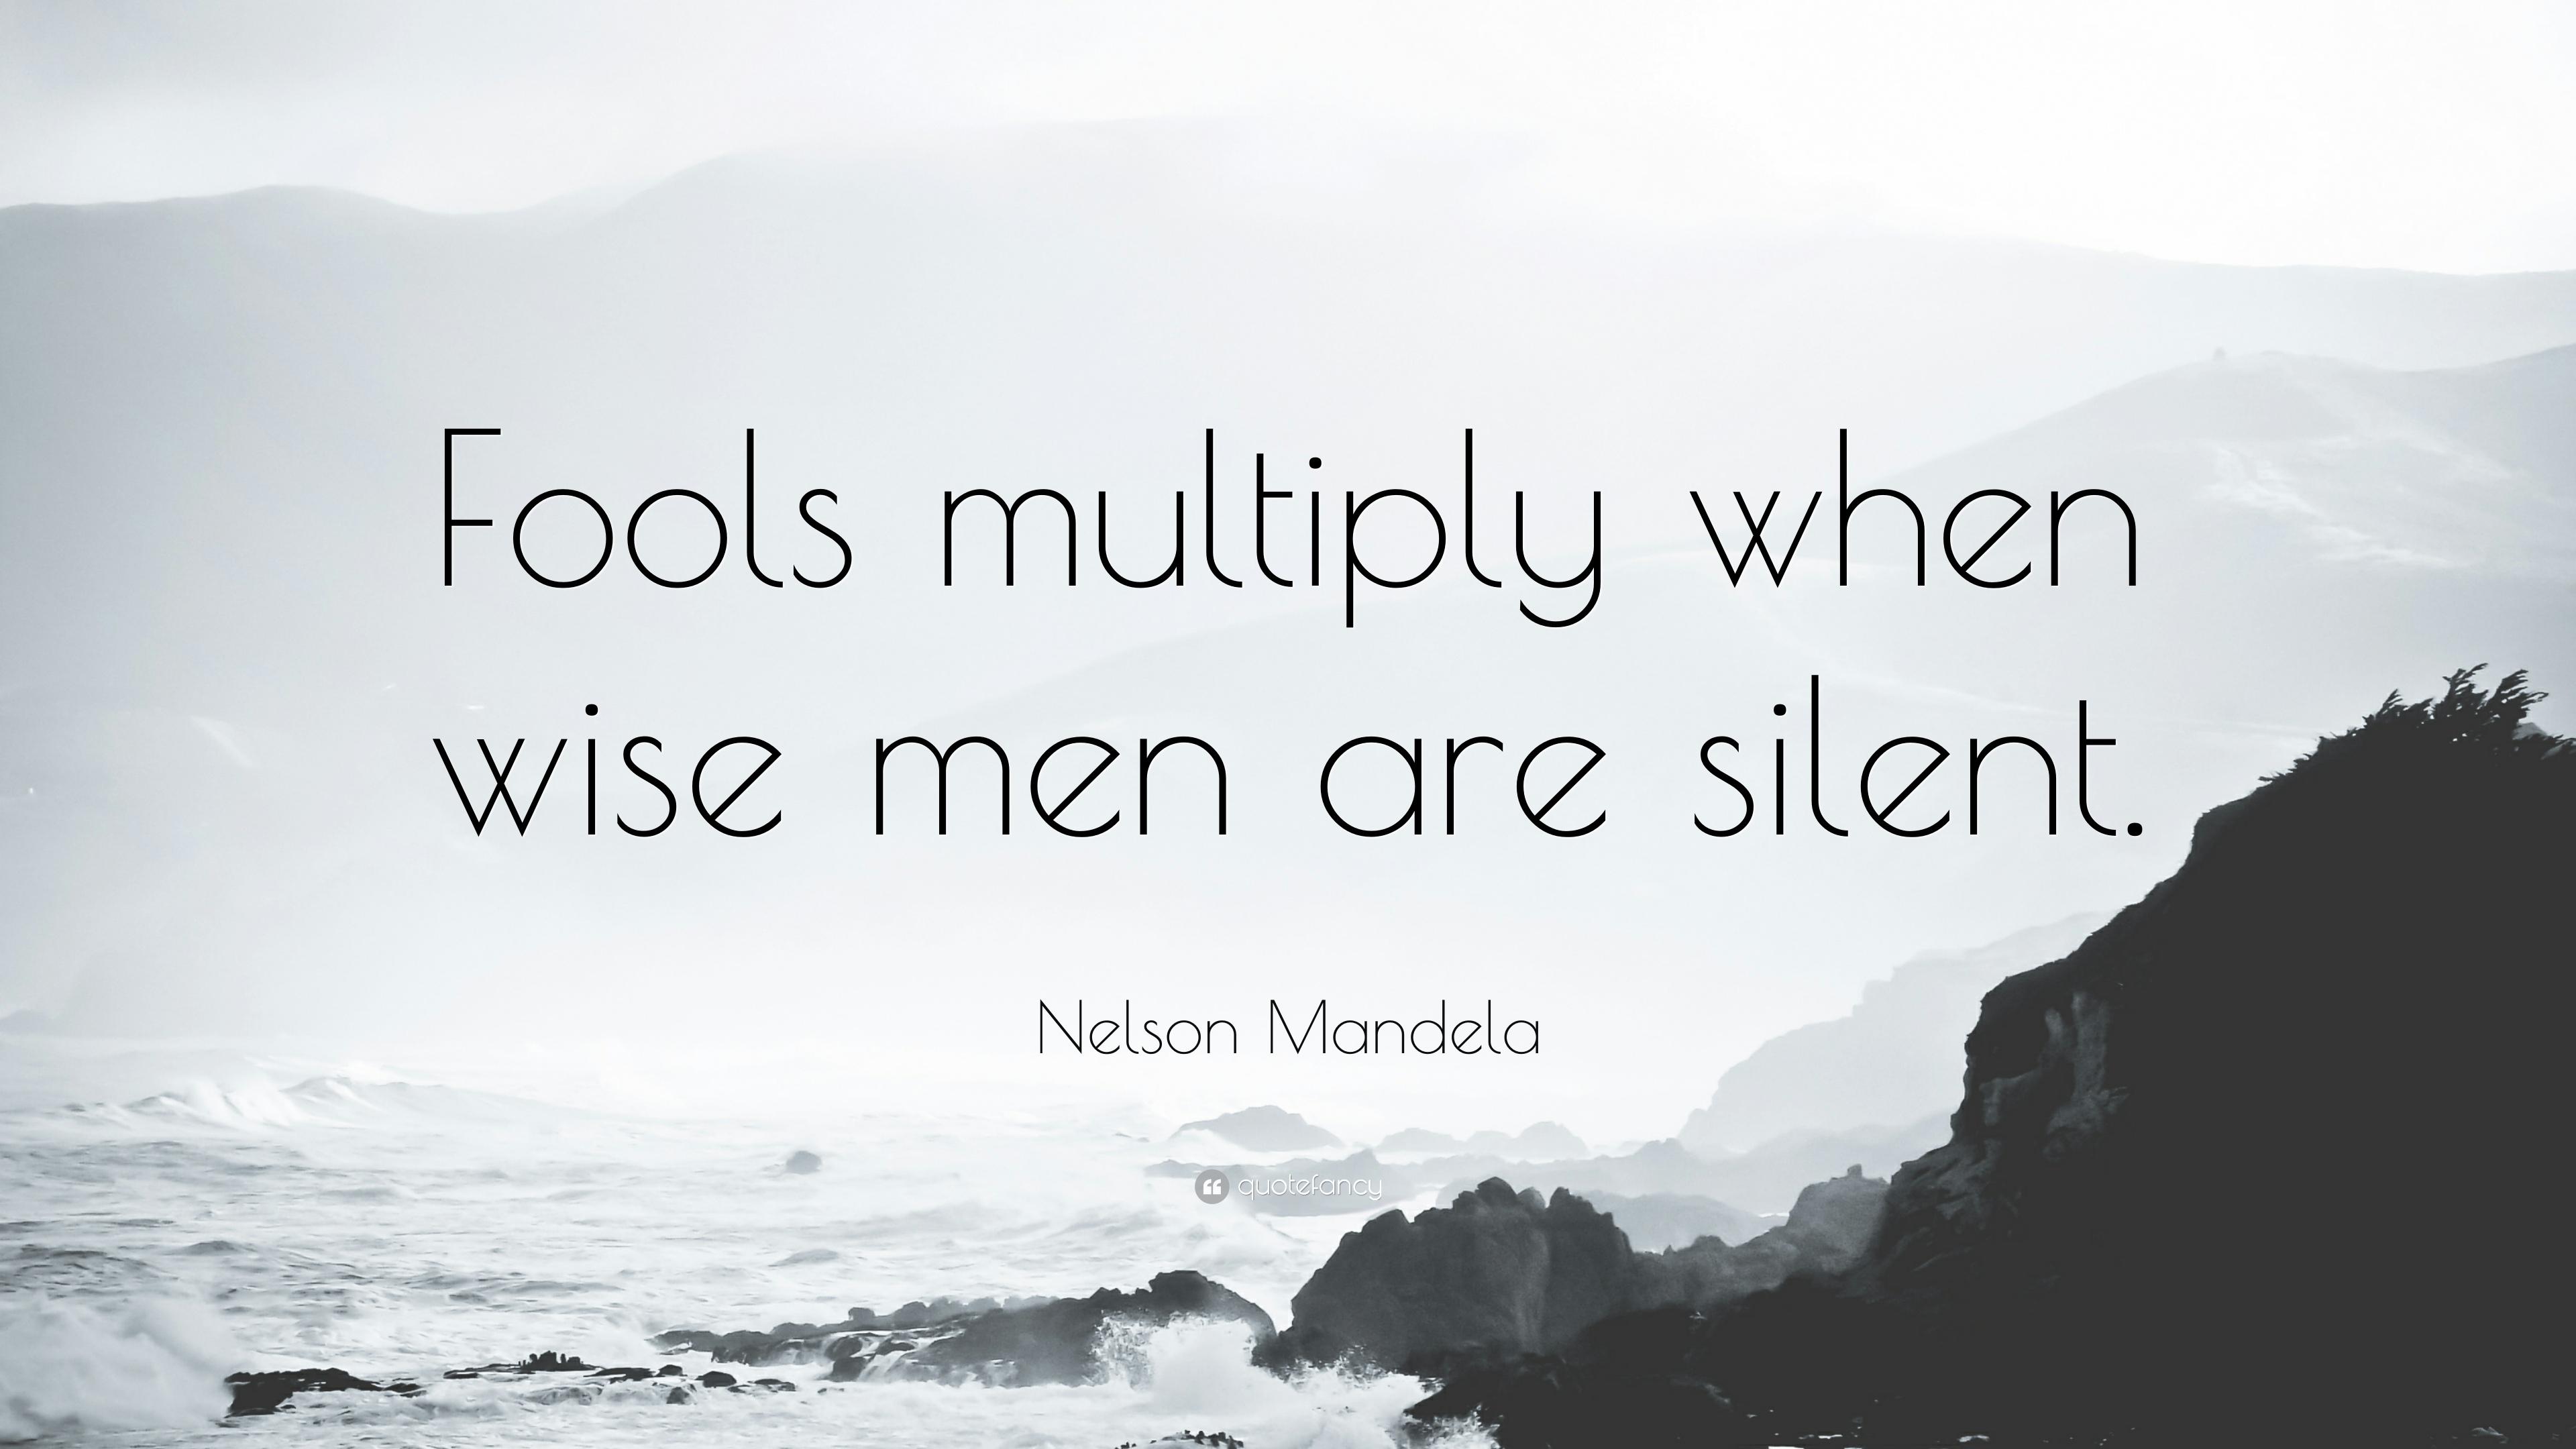 Nelson Mandela Quote: “Fools multiply when wise men are